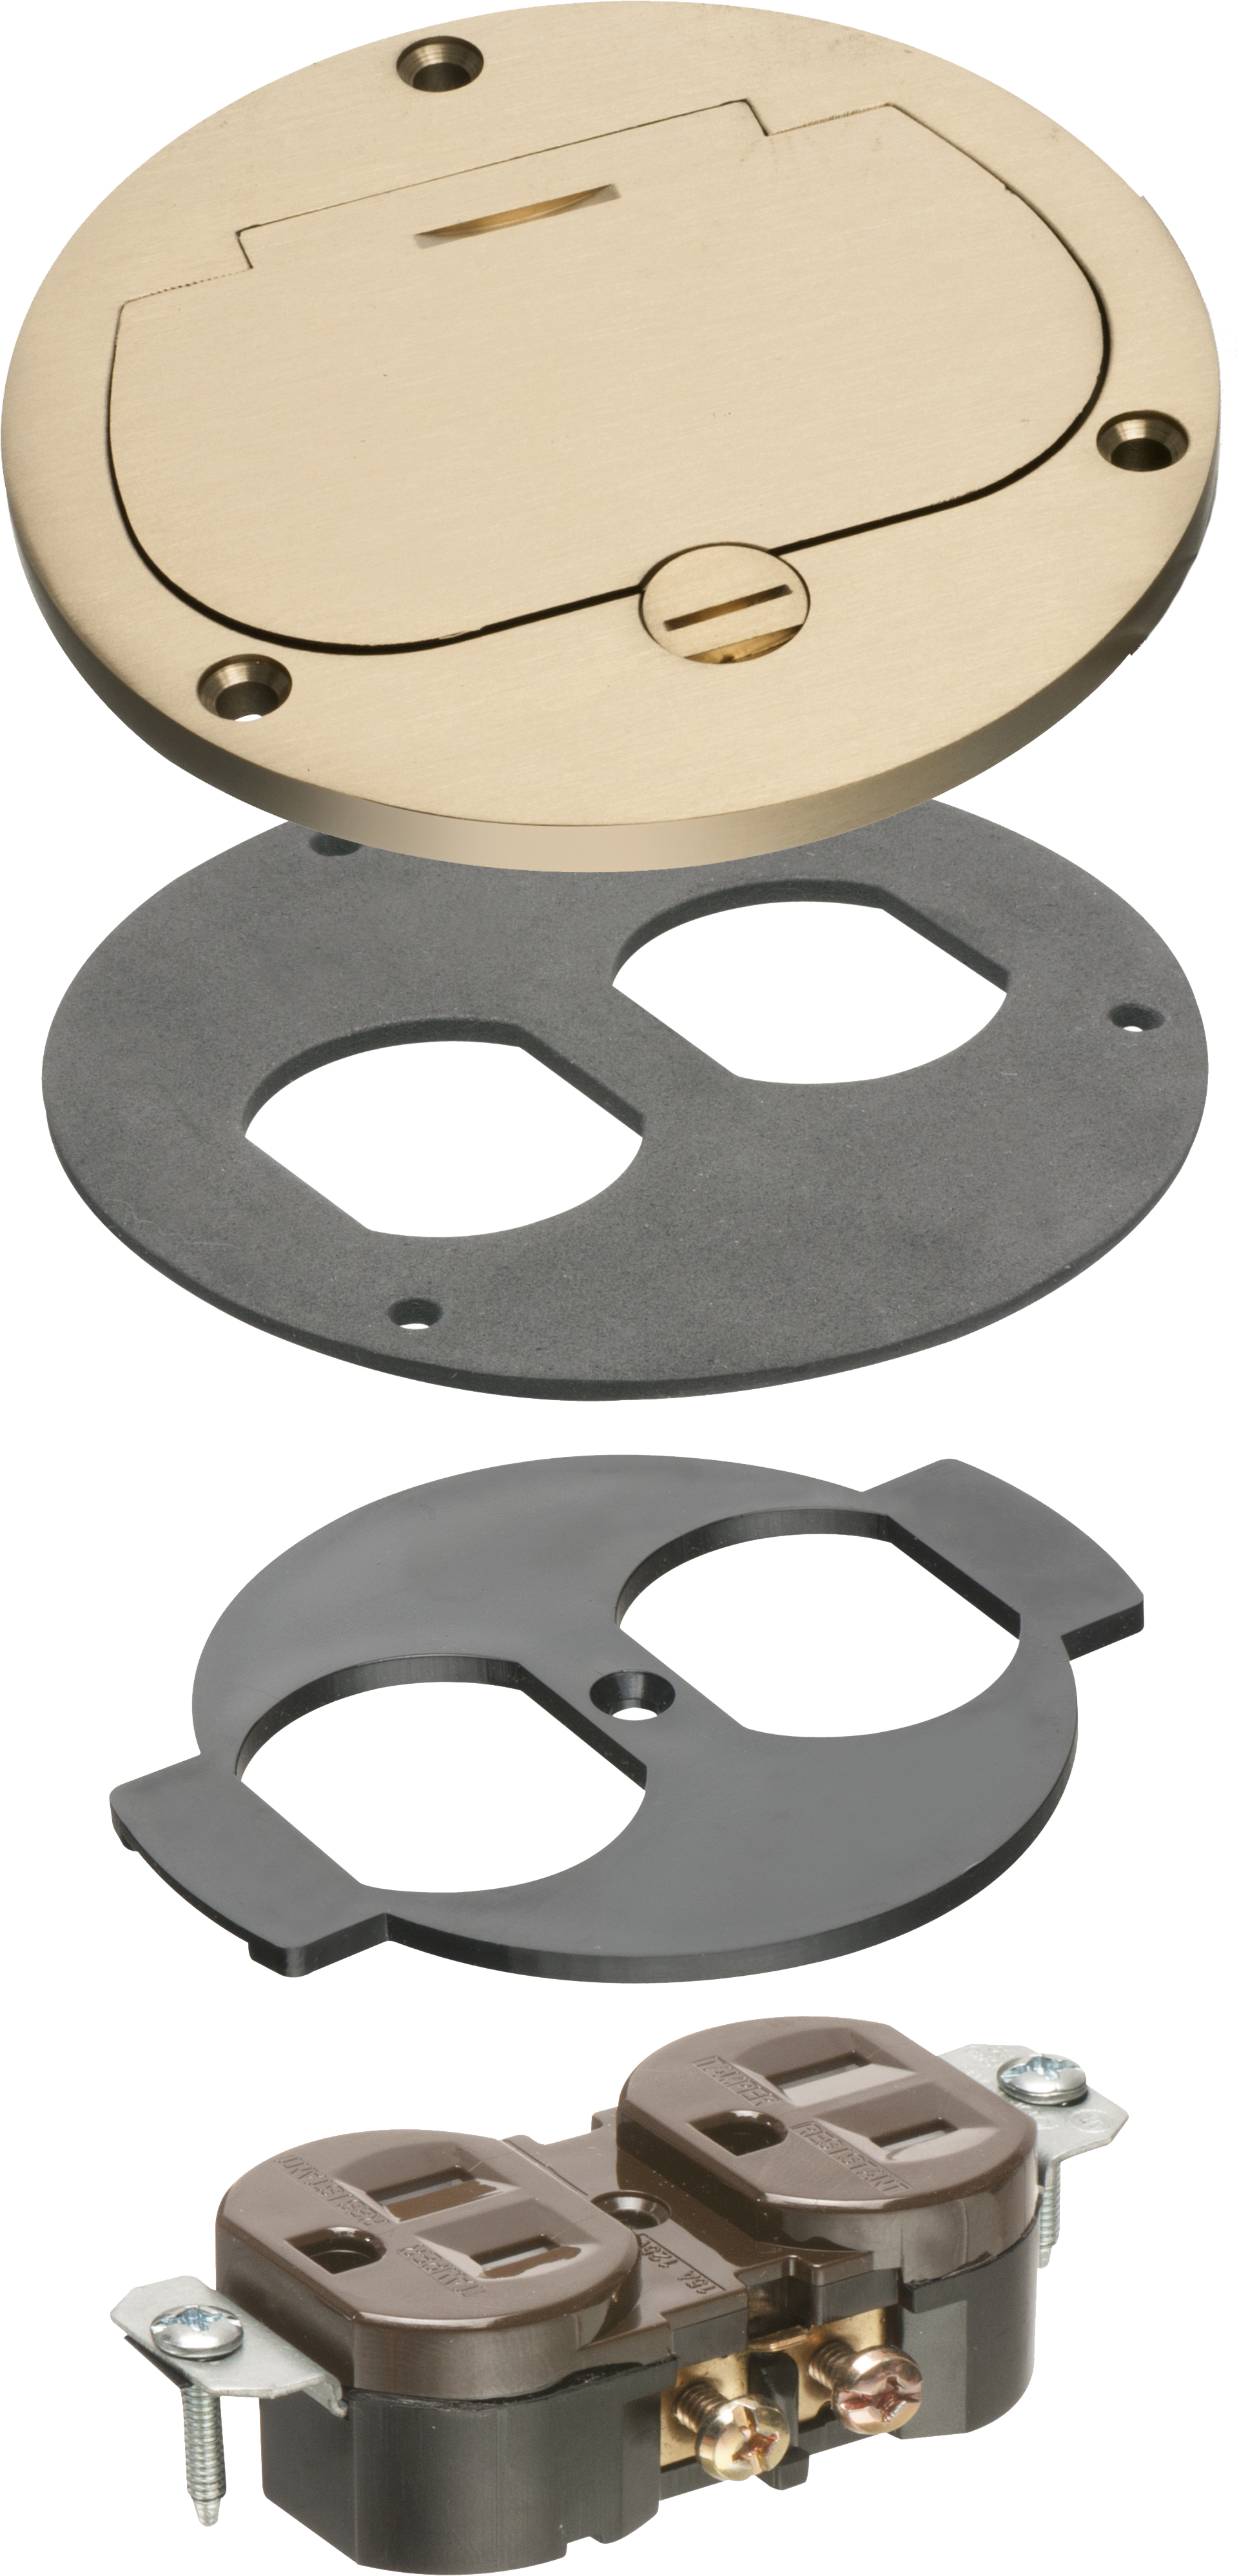 Trim kit for Arlington's FLB3500 cut in box, Includes cover, gasket and receptacle. Metallic Brass.